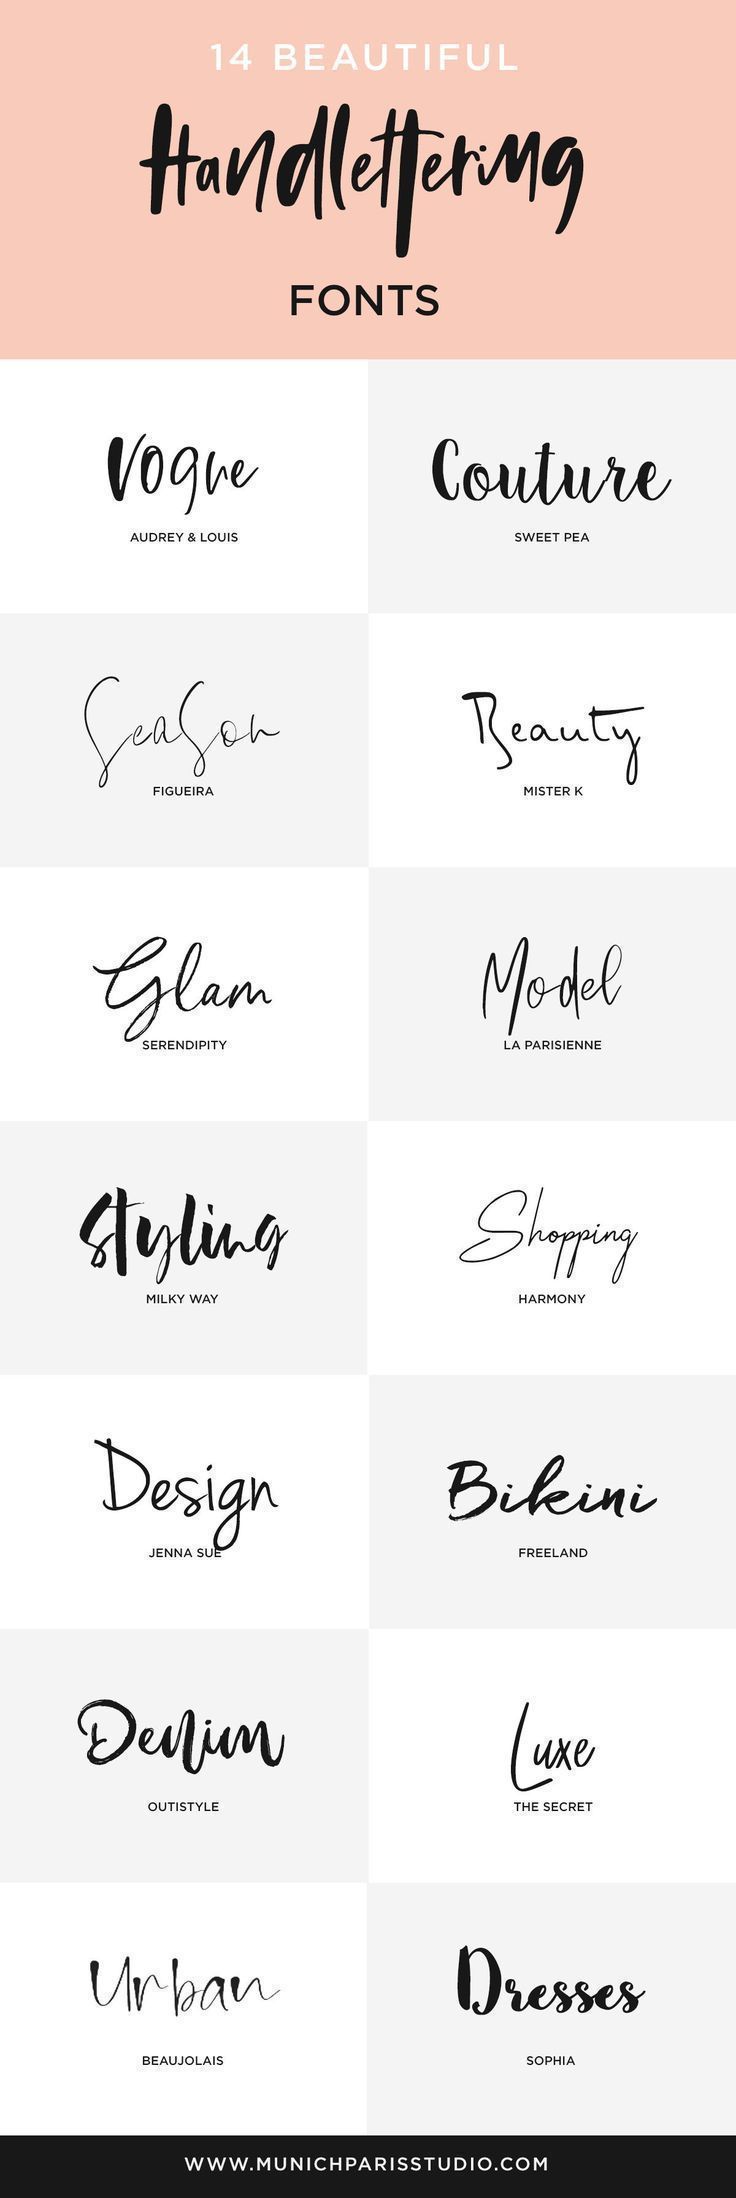 14 Beautiful Hand-Lettered Fonts for Logo & Branding | MunichParis Studio - 14 Beautiful Hand-Lettered Fonts for Logo & Branding | MunichParis Studio -   13 beauty Logo design ideas